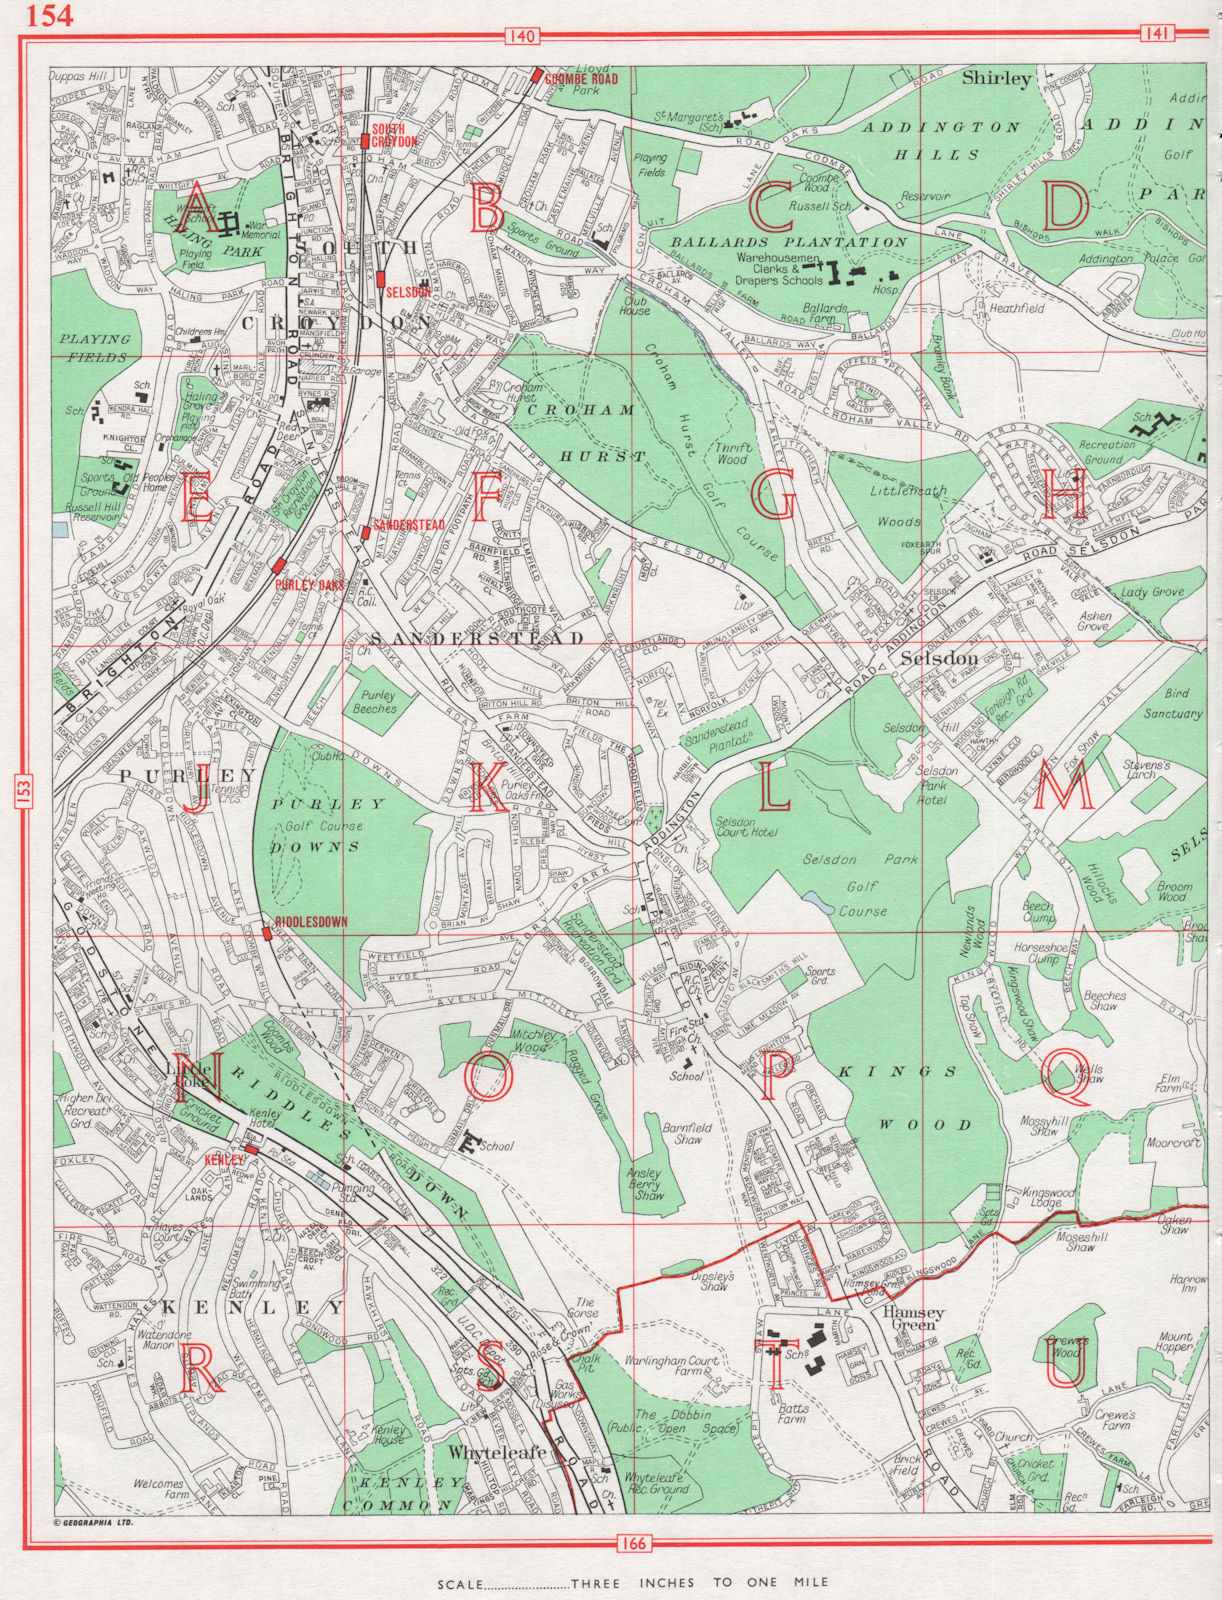 Associate Product PURLEY. South Croydon Sanderstead Selsdon Kenley Whyteleafe 1964 old map